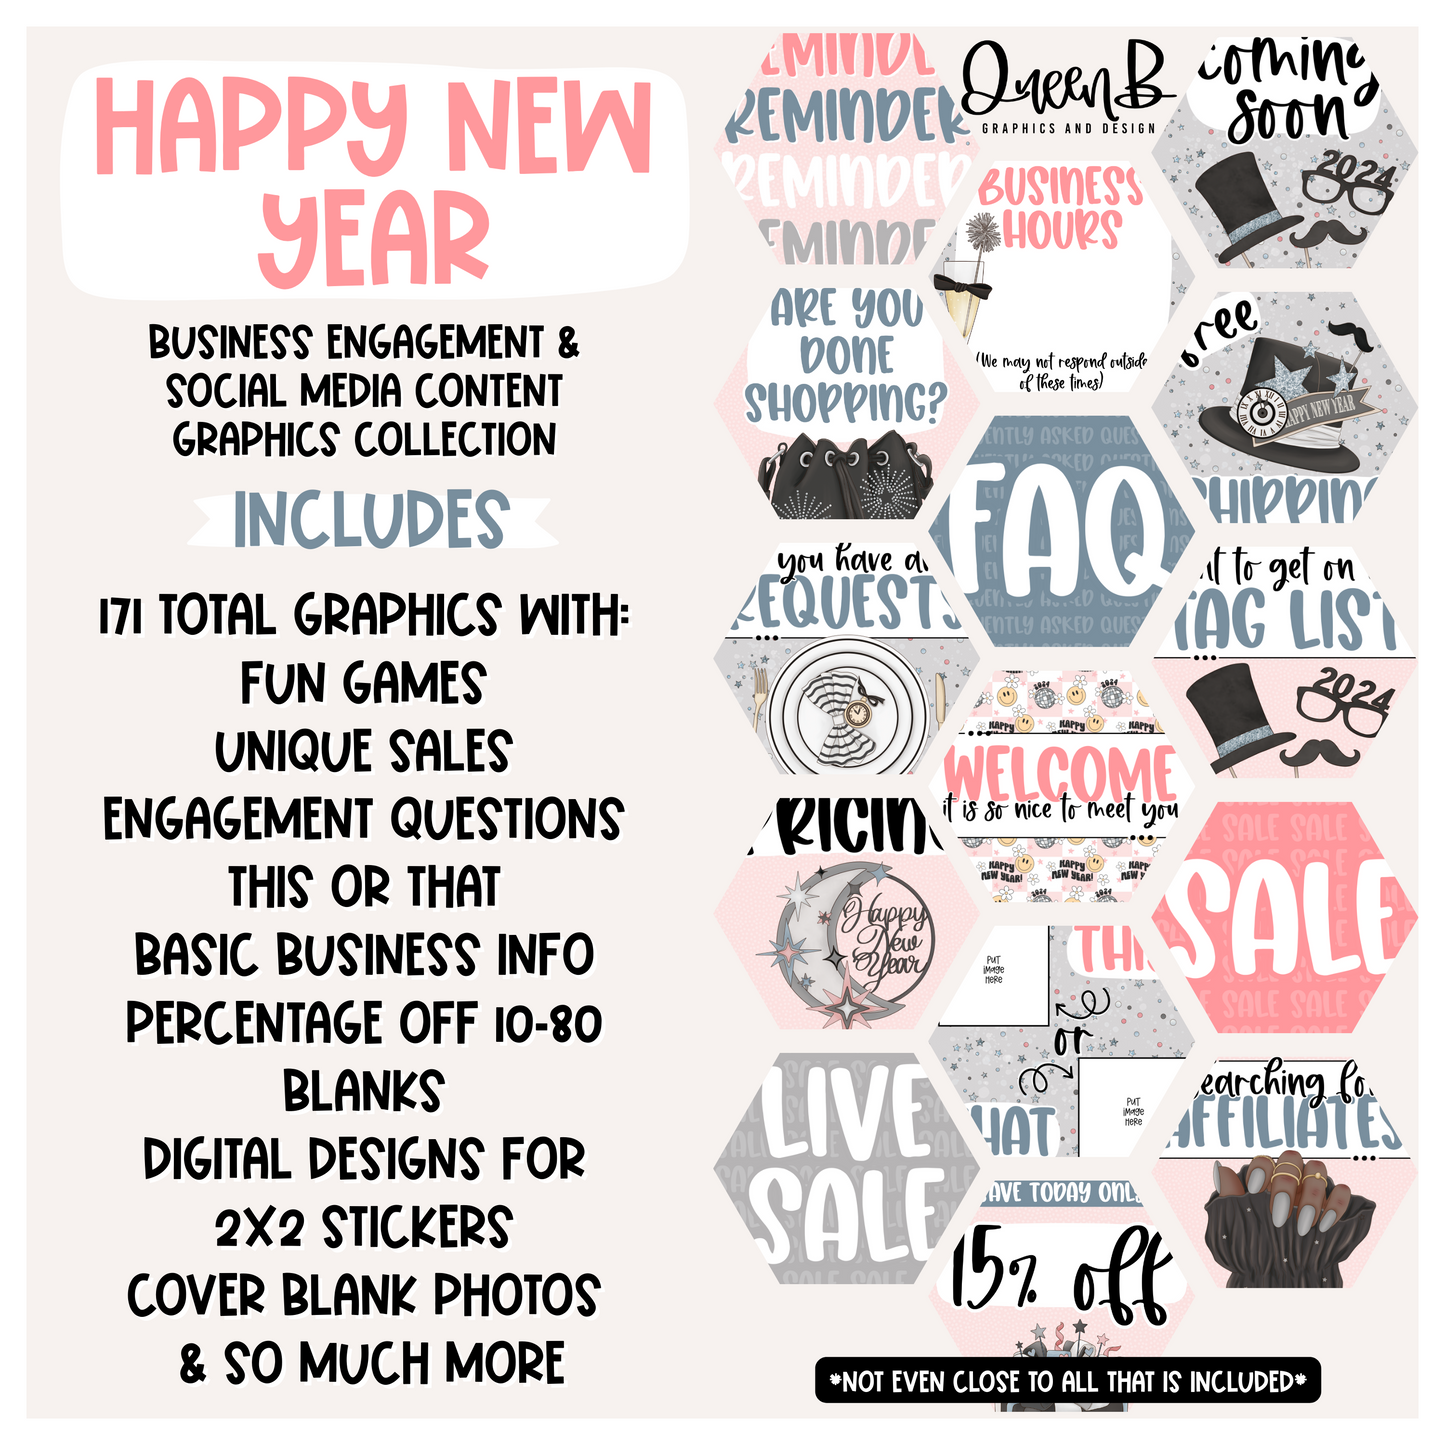 Happy New Year Business Engagement & Social Media Content Graphics Collection